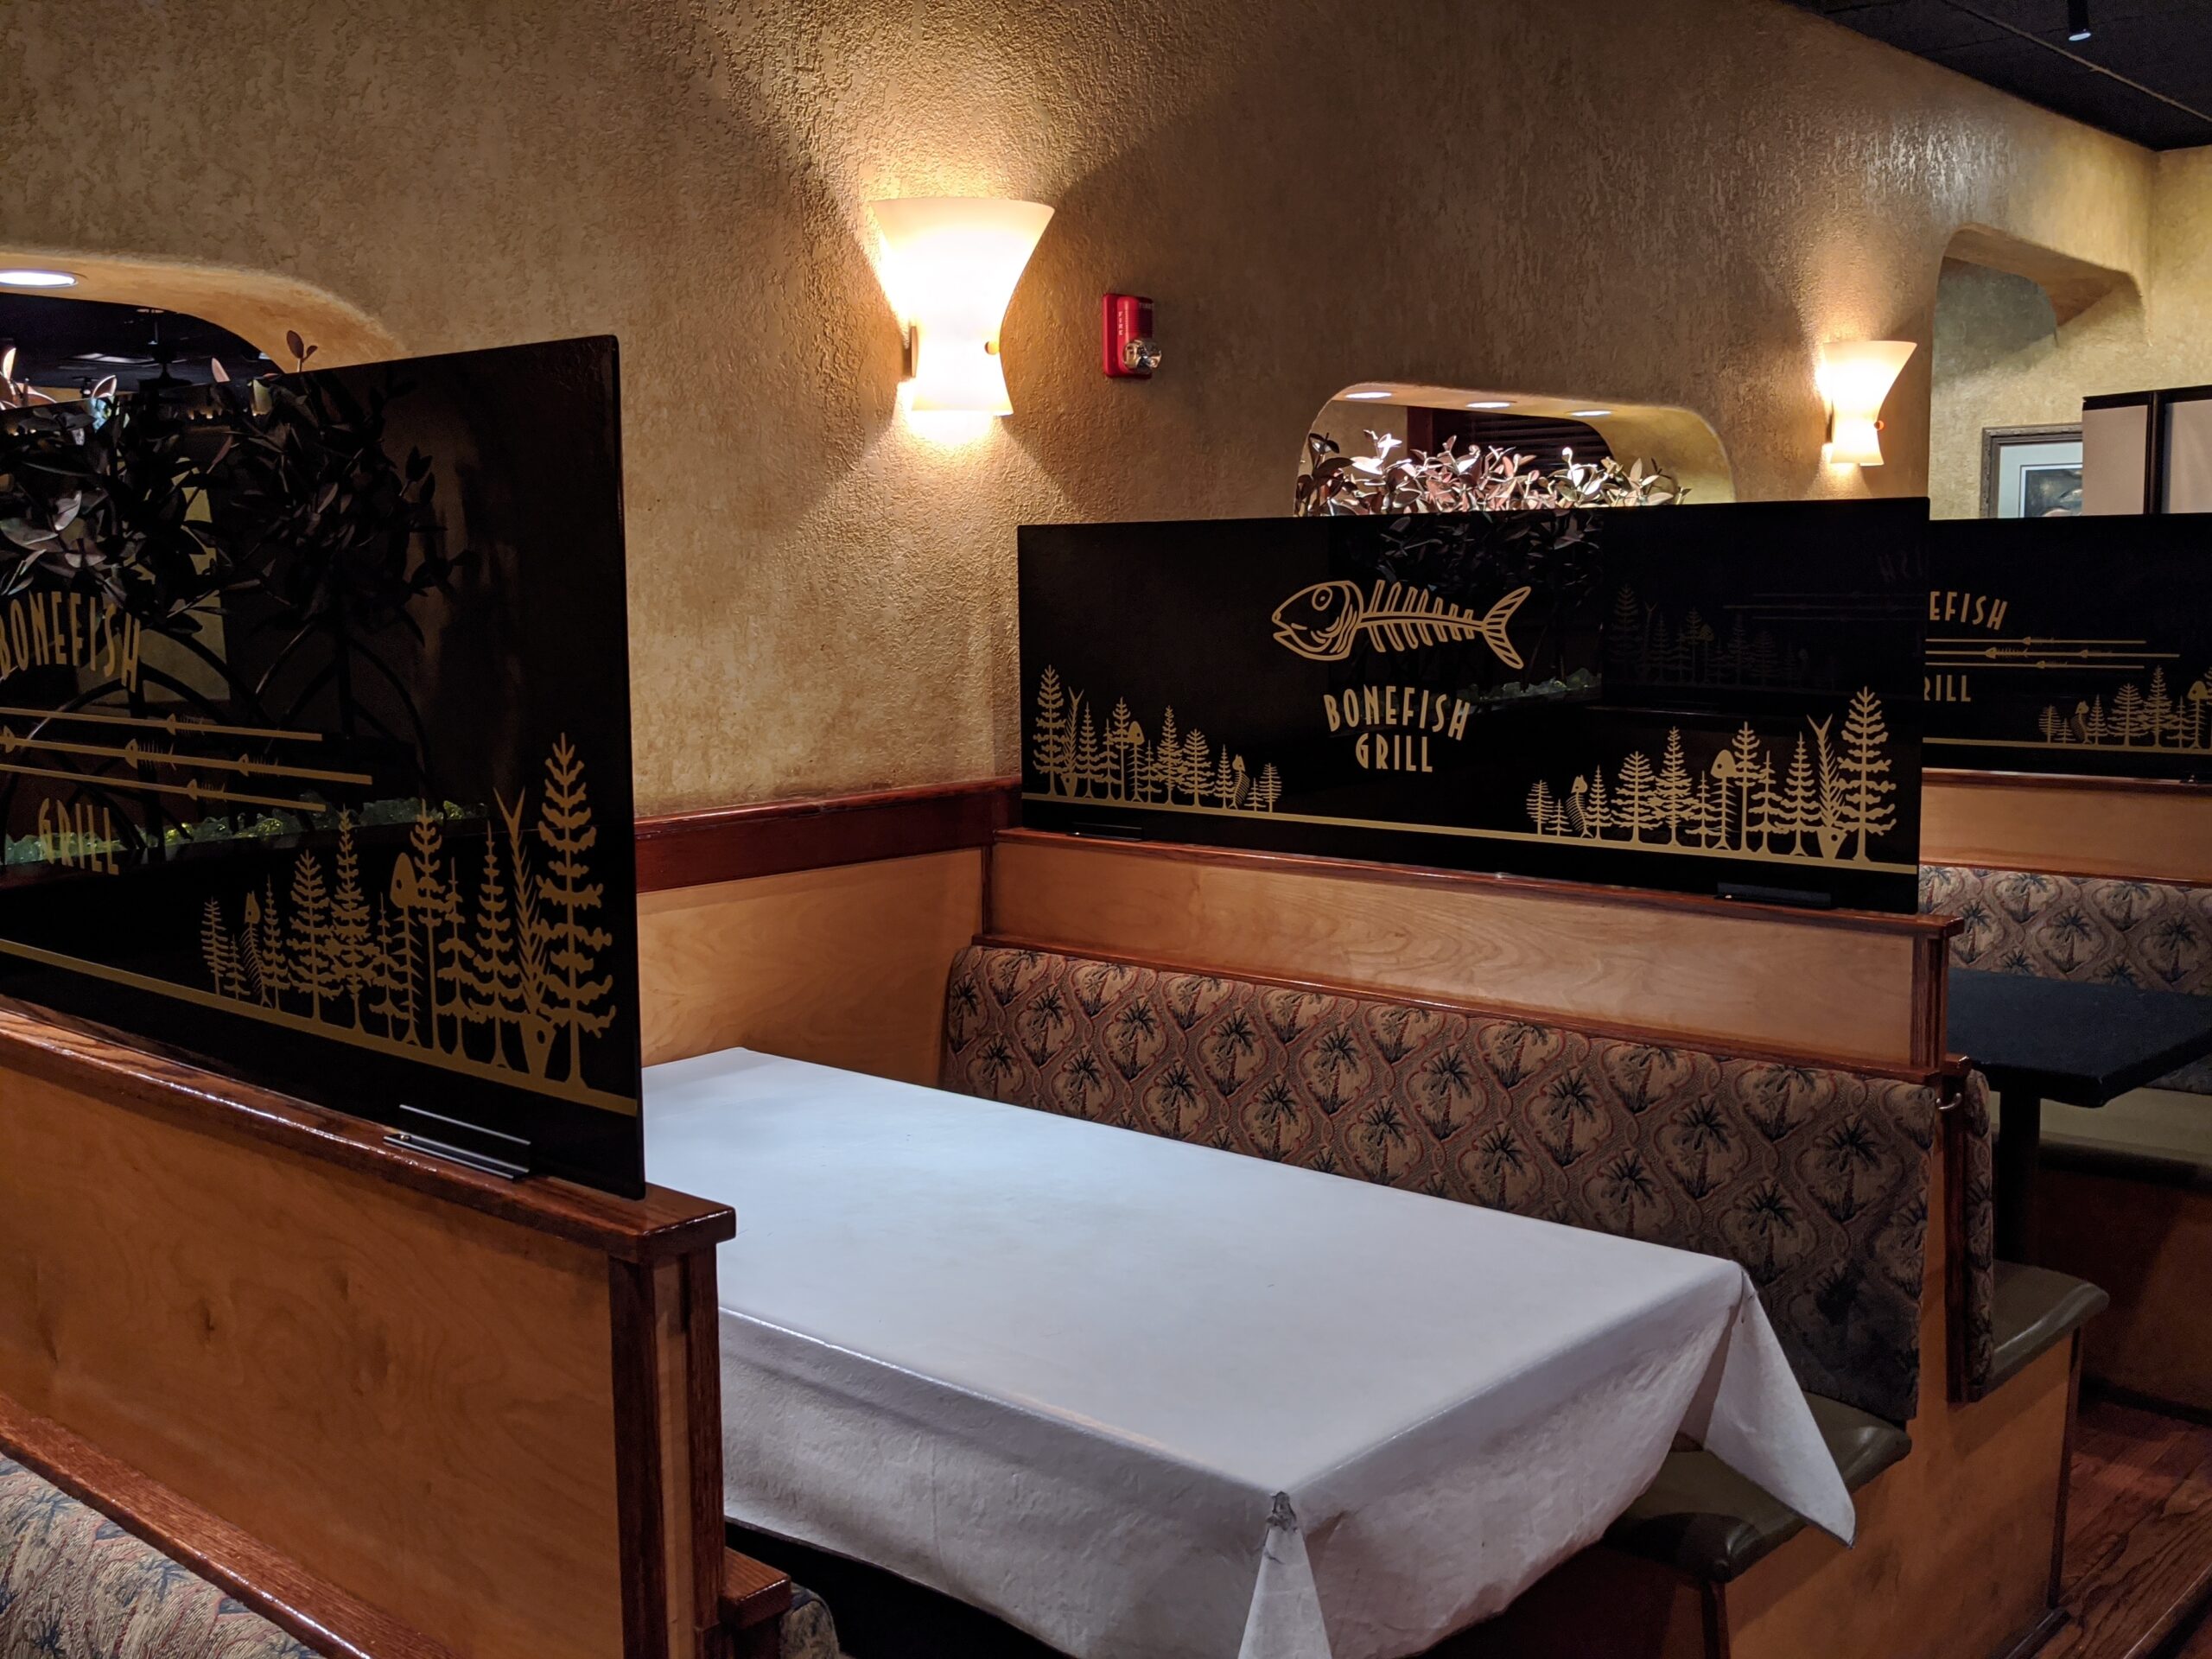 Bonefish Grill Restaurant plastic booth dividers sneeze guards with custom designs